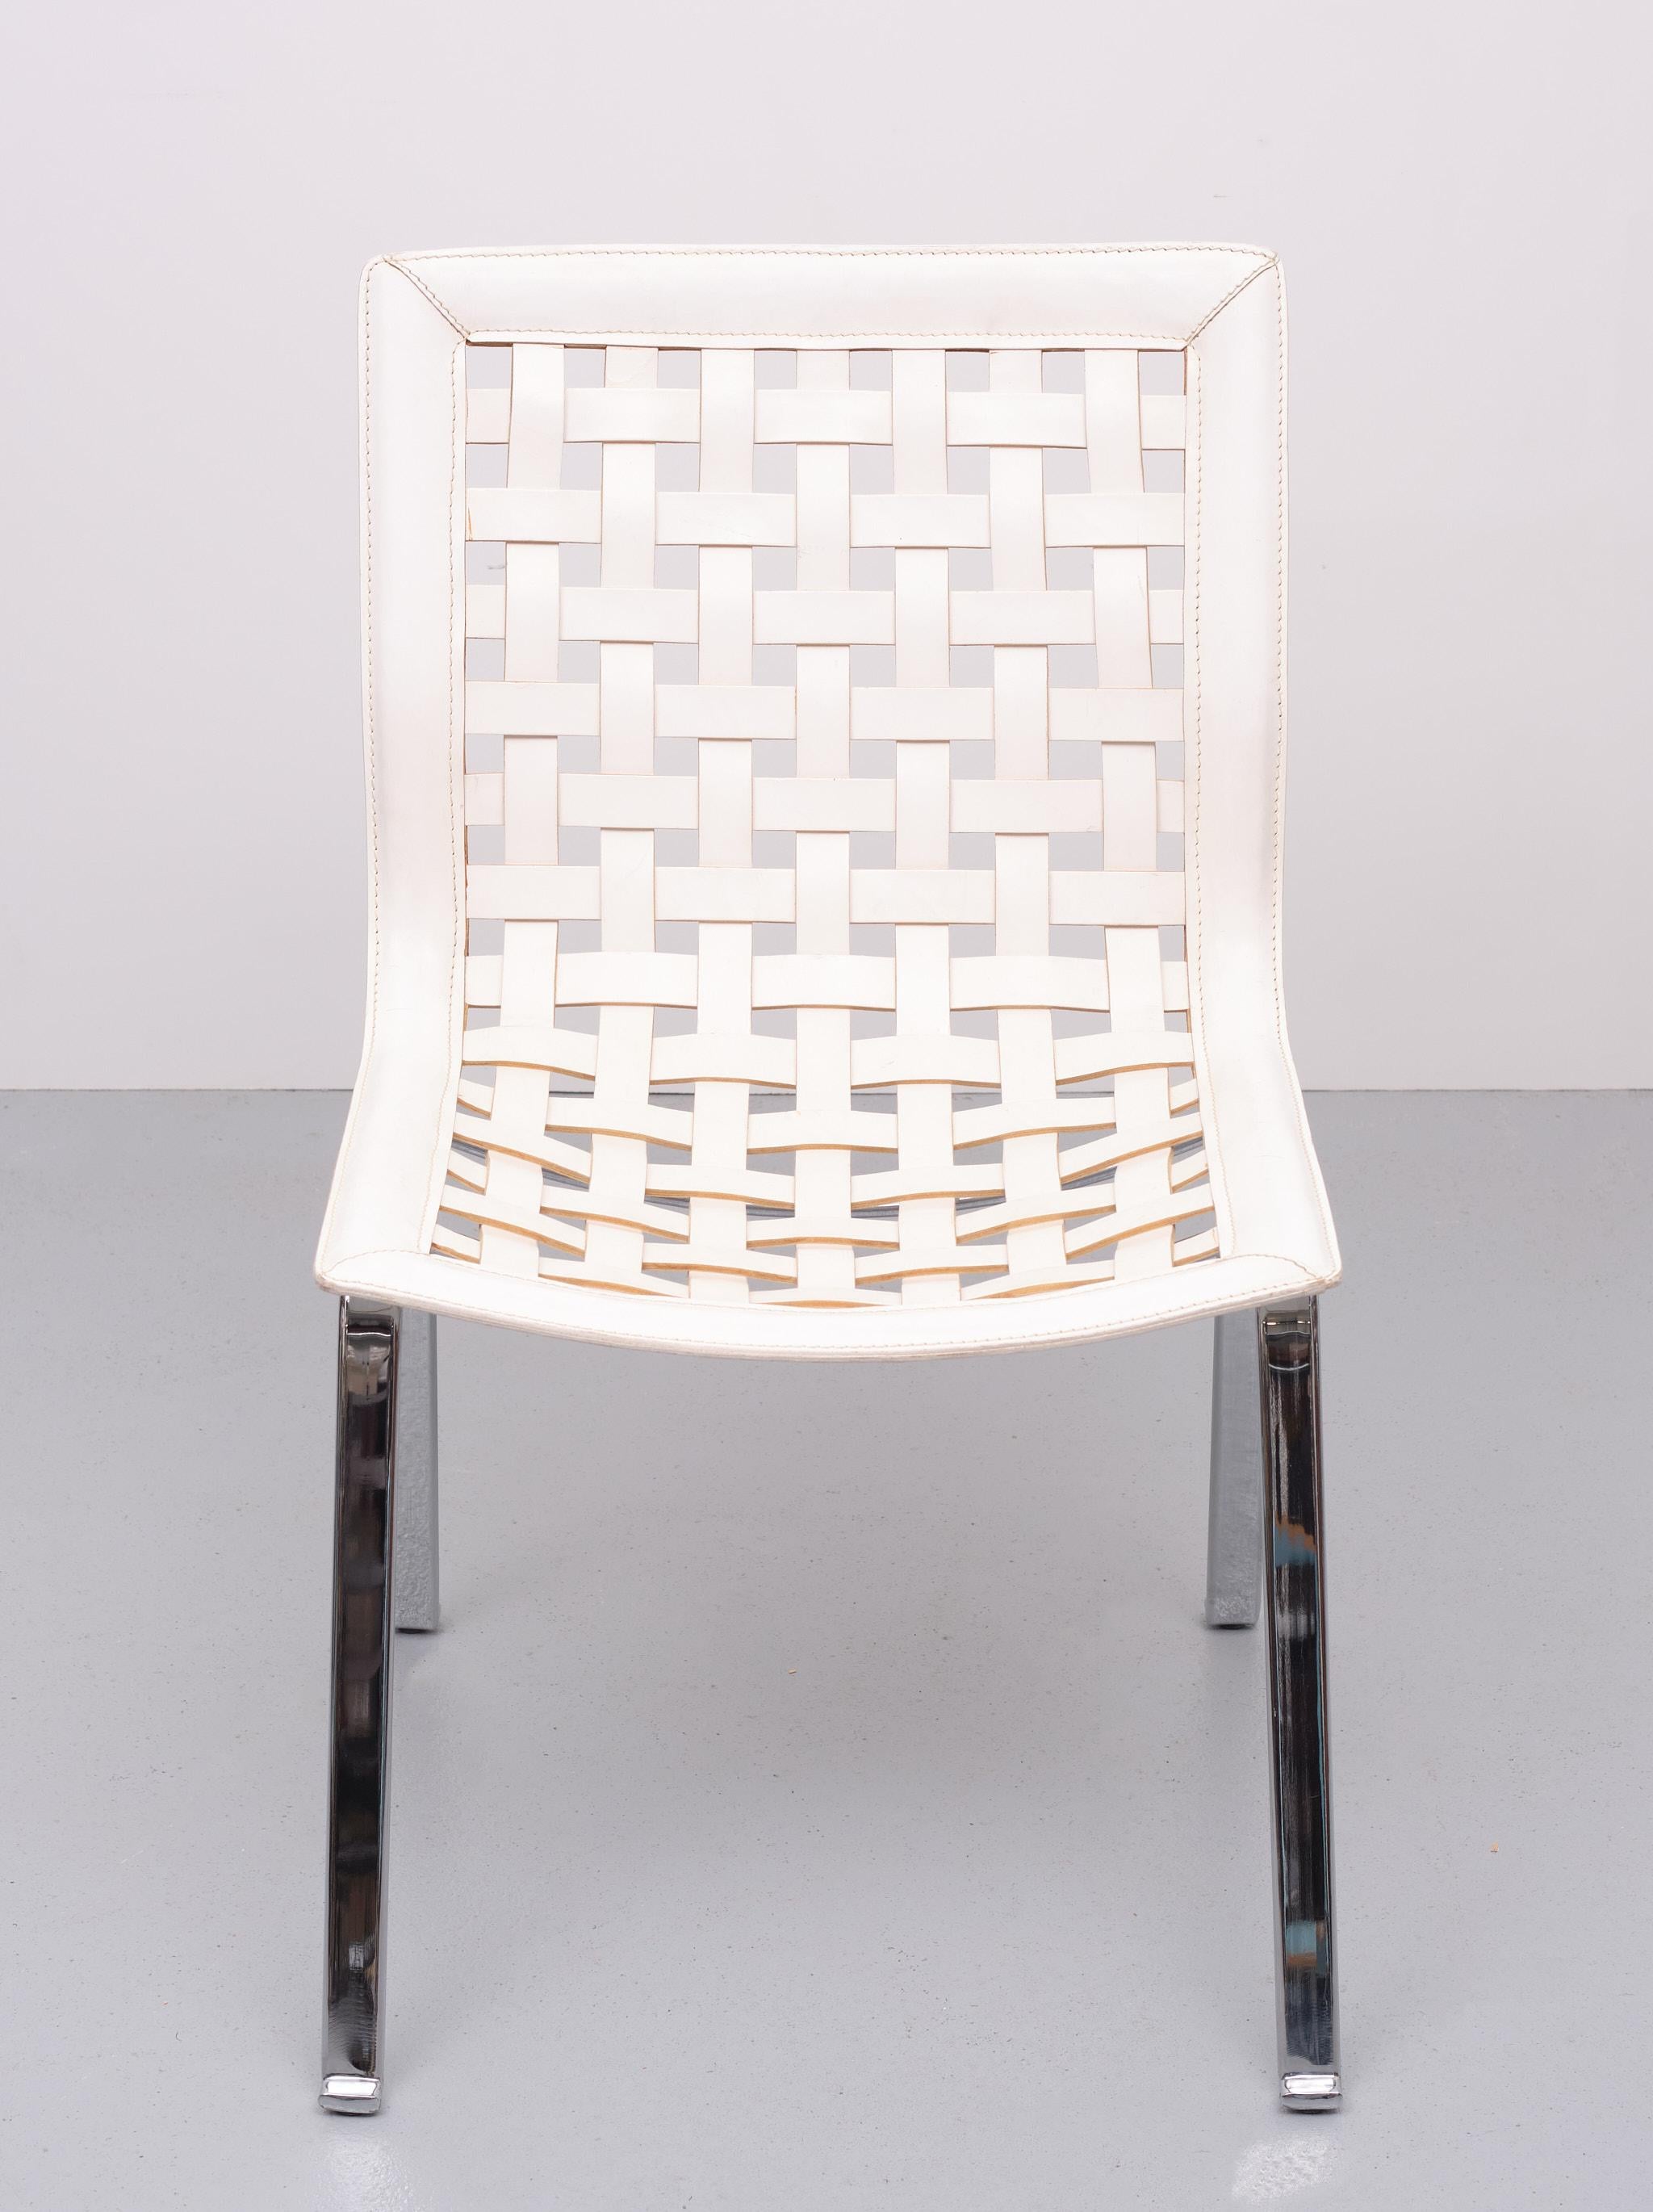 Fasem Leather Net Chair Giancarlo Vegni 1980s  For Sale 1